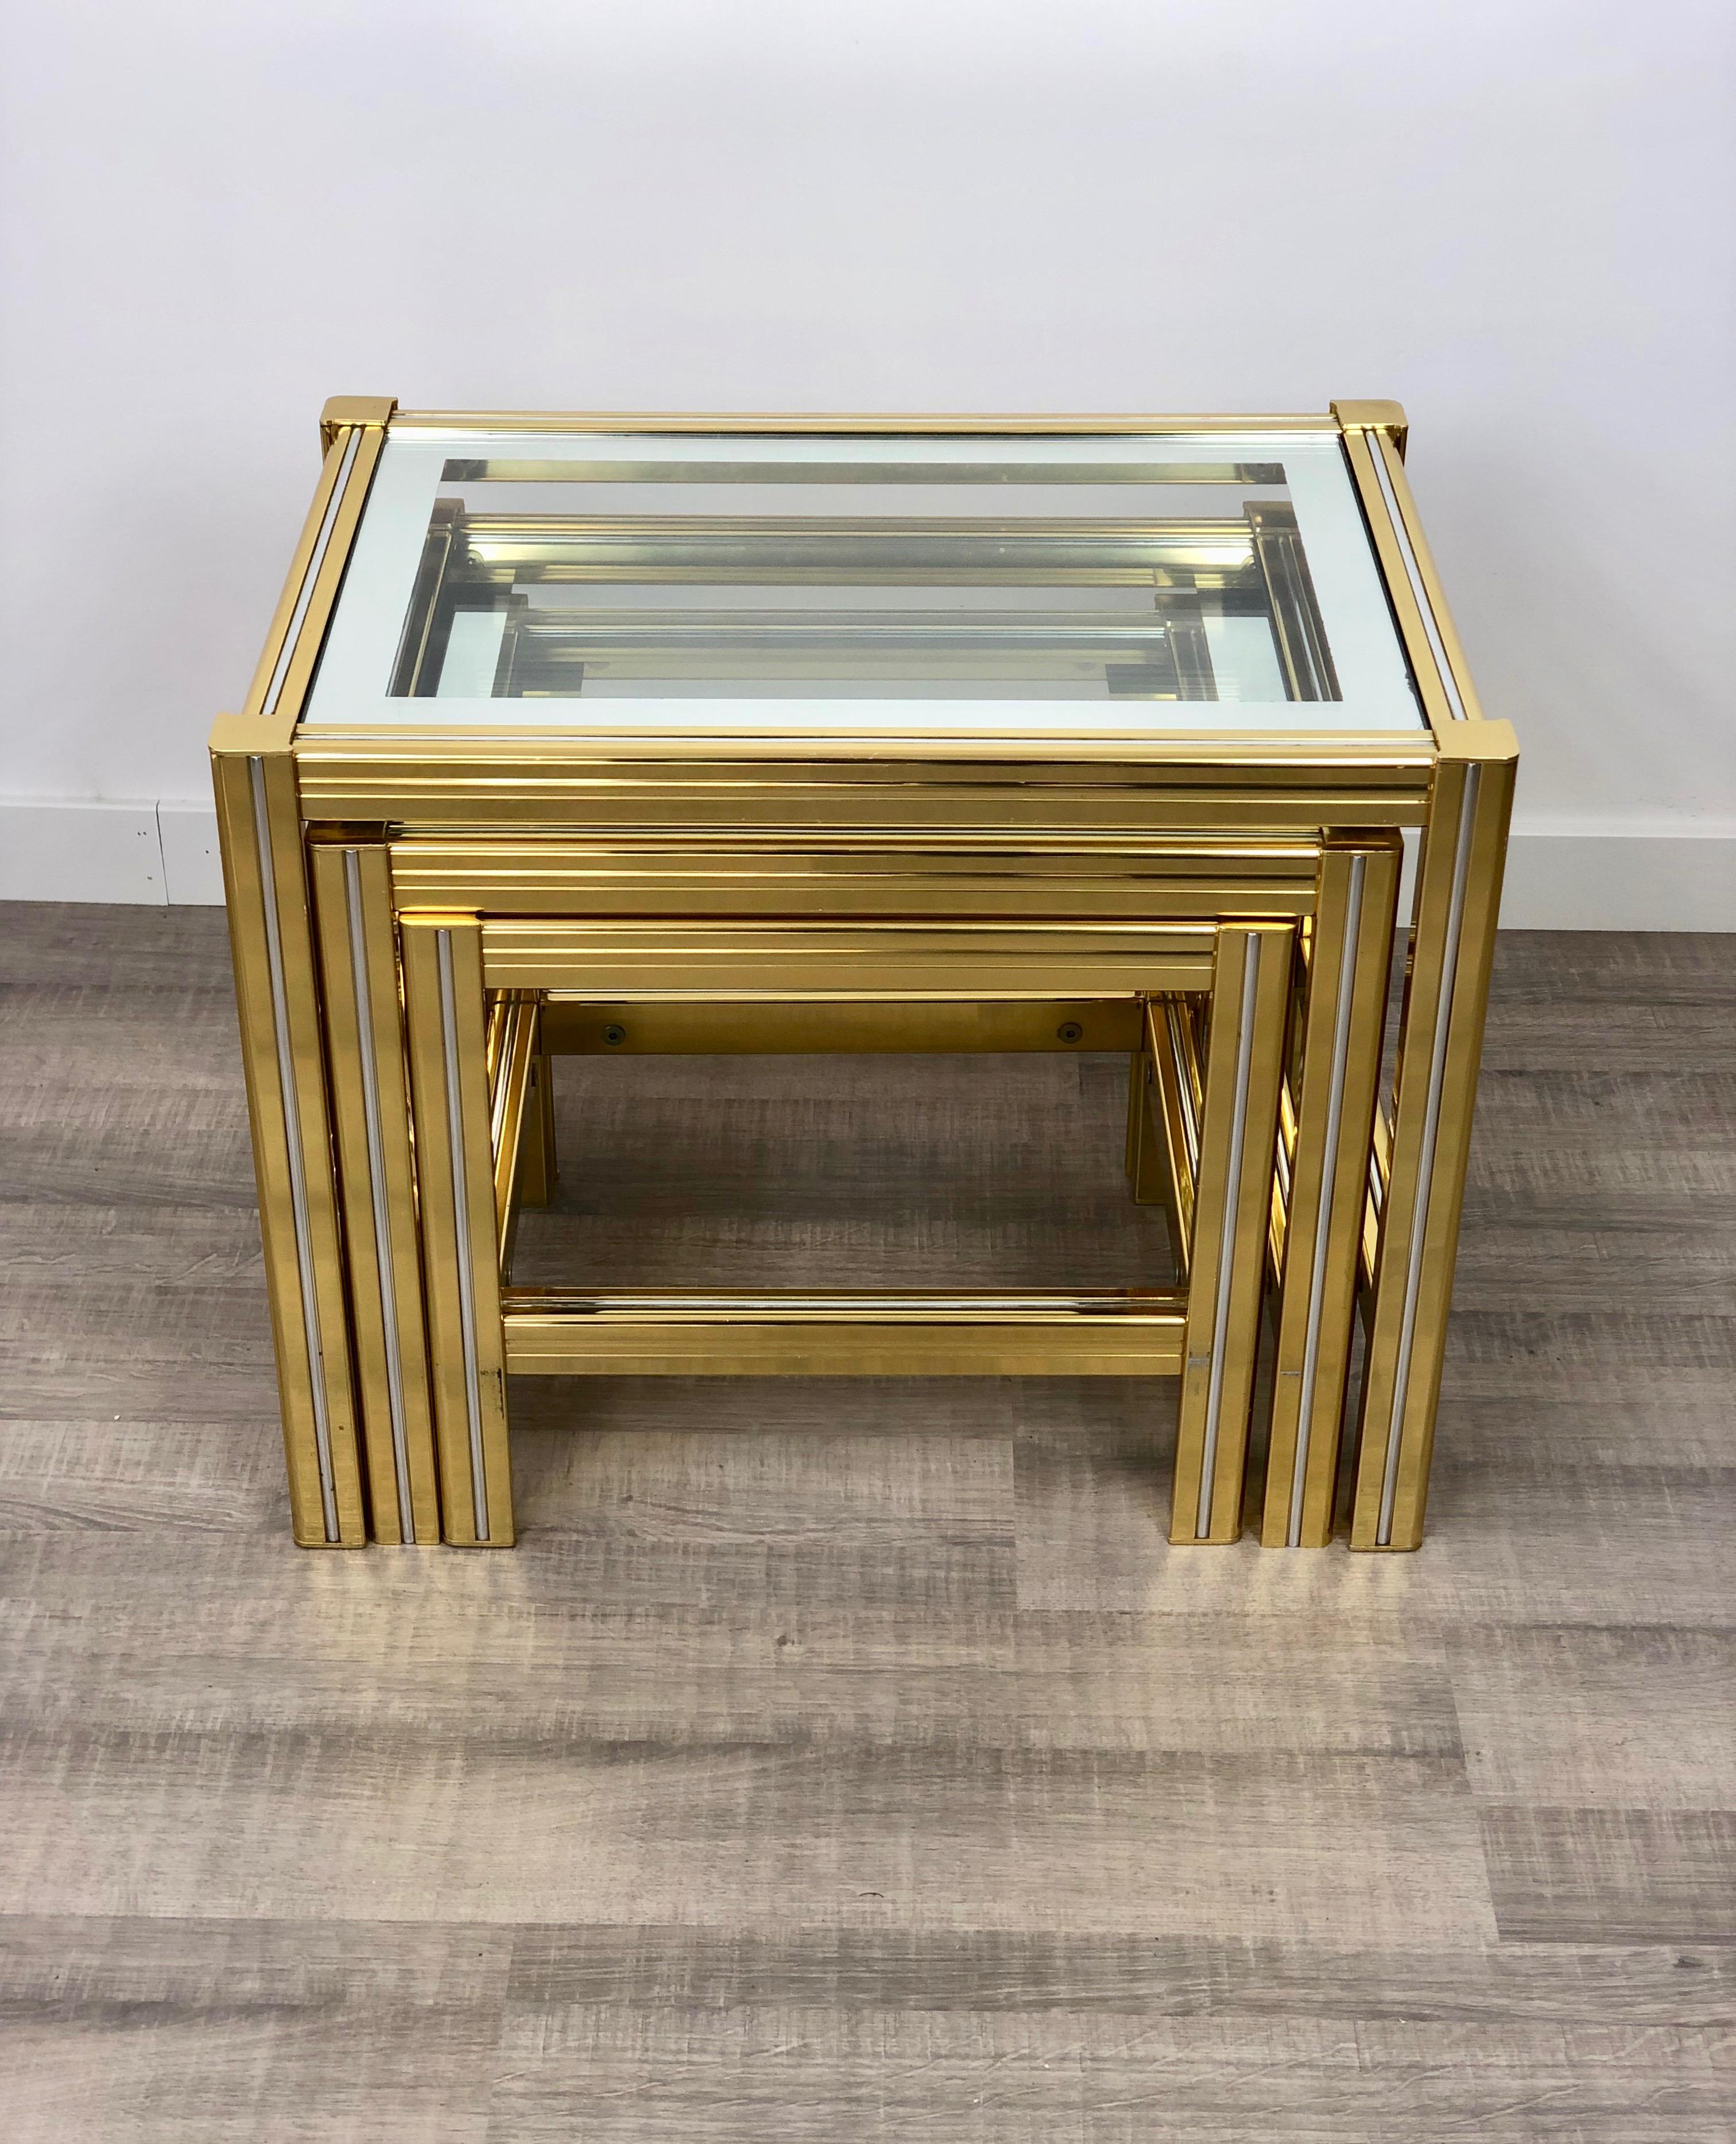 Metal Tris of Increasing Dimensions Side Coffe Table in Brass, Glass and Chrome, 1970s For Sale